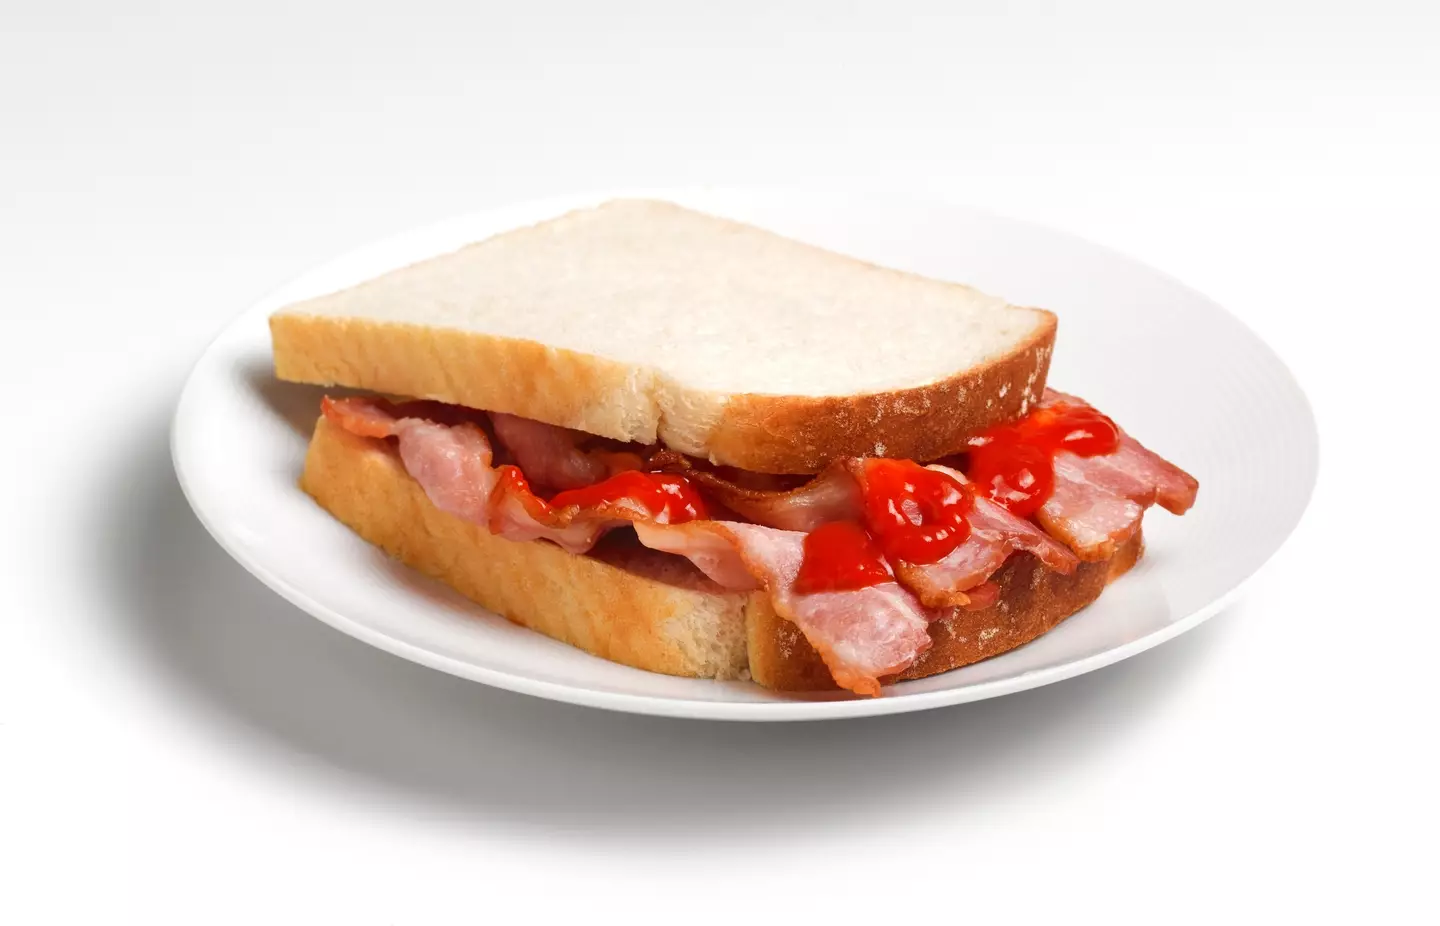 What's a bacon sandwich without crispy bacon?